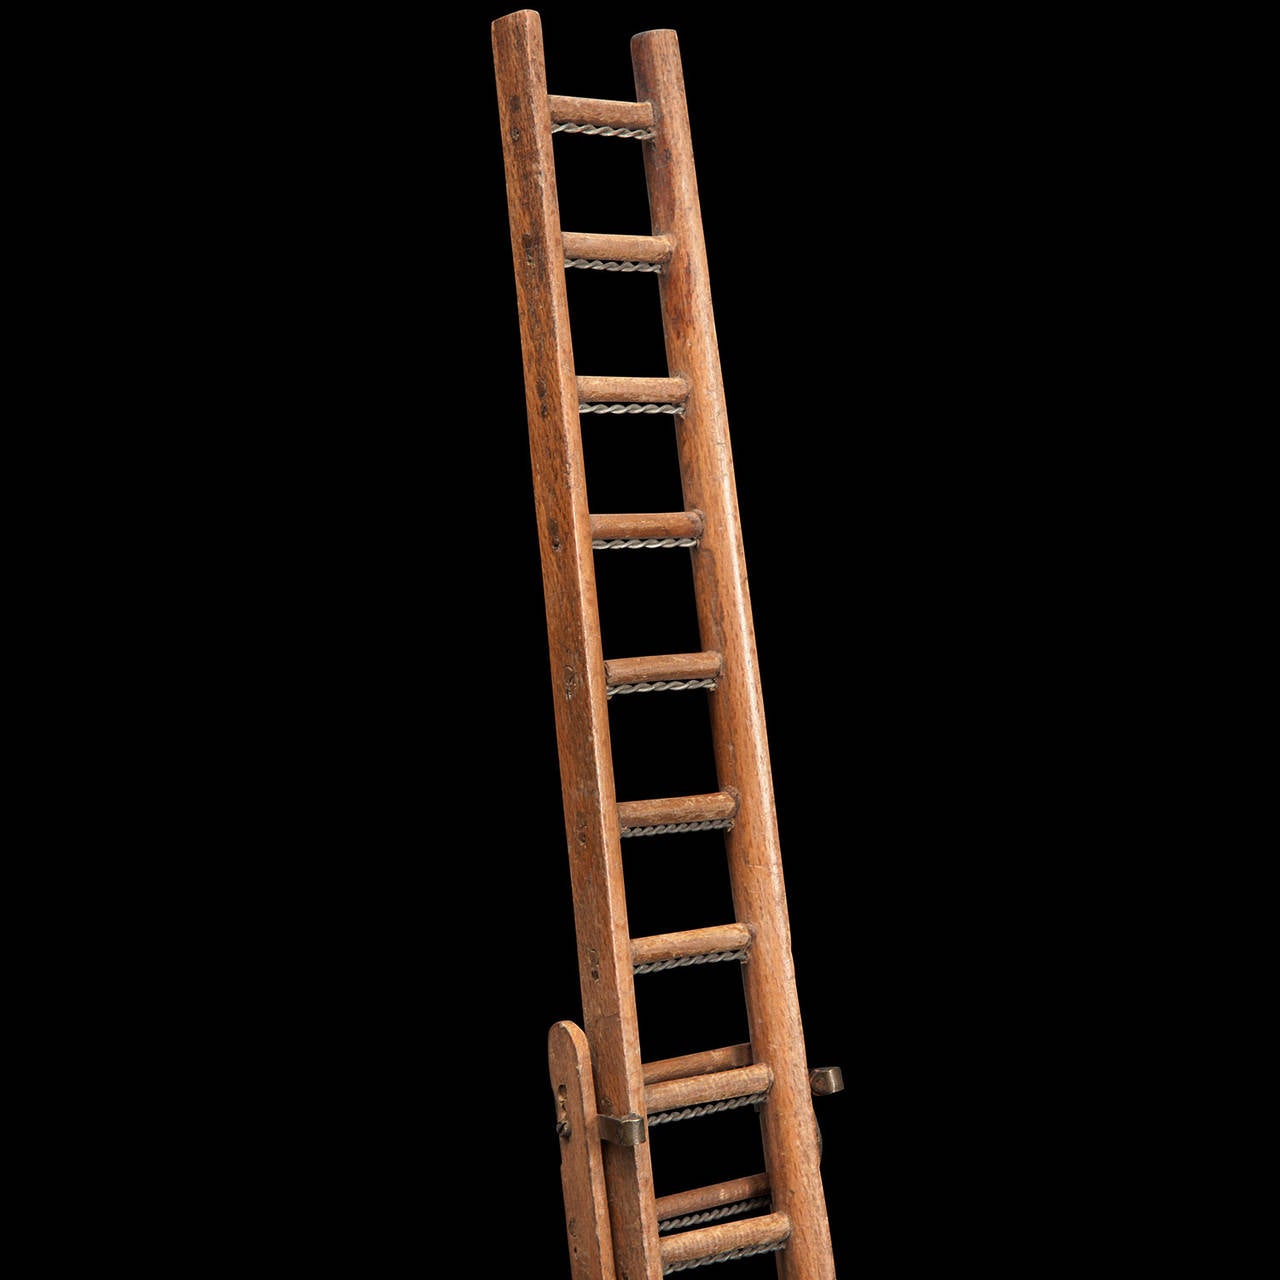 Hand-Crafted Collection of Salesman Sample Ladders